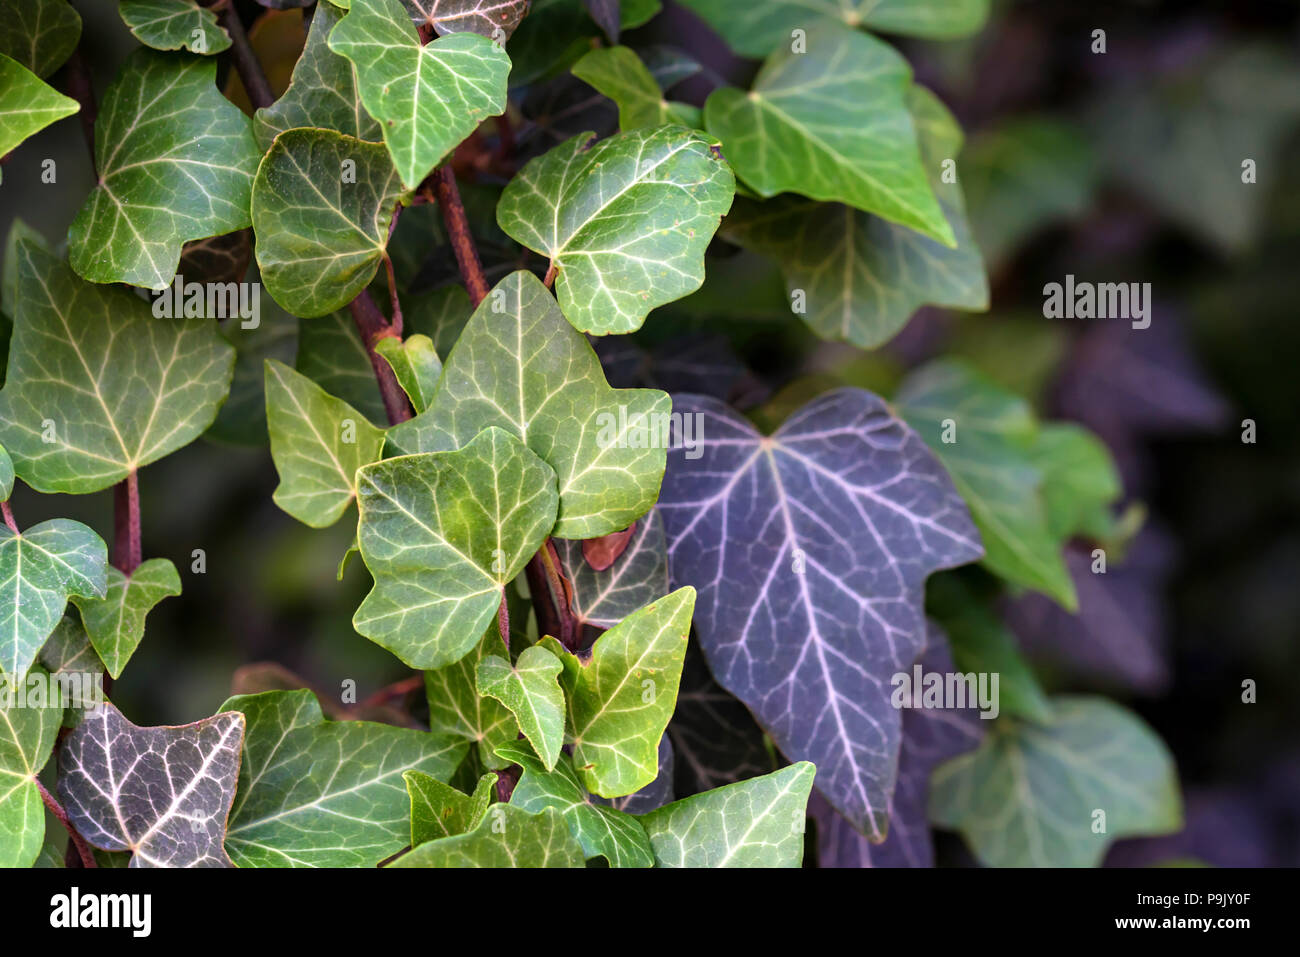 Common Ivy or Hedera helix Stock Photo